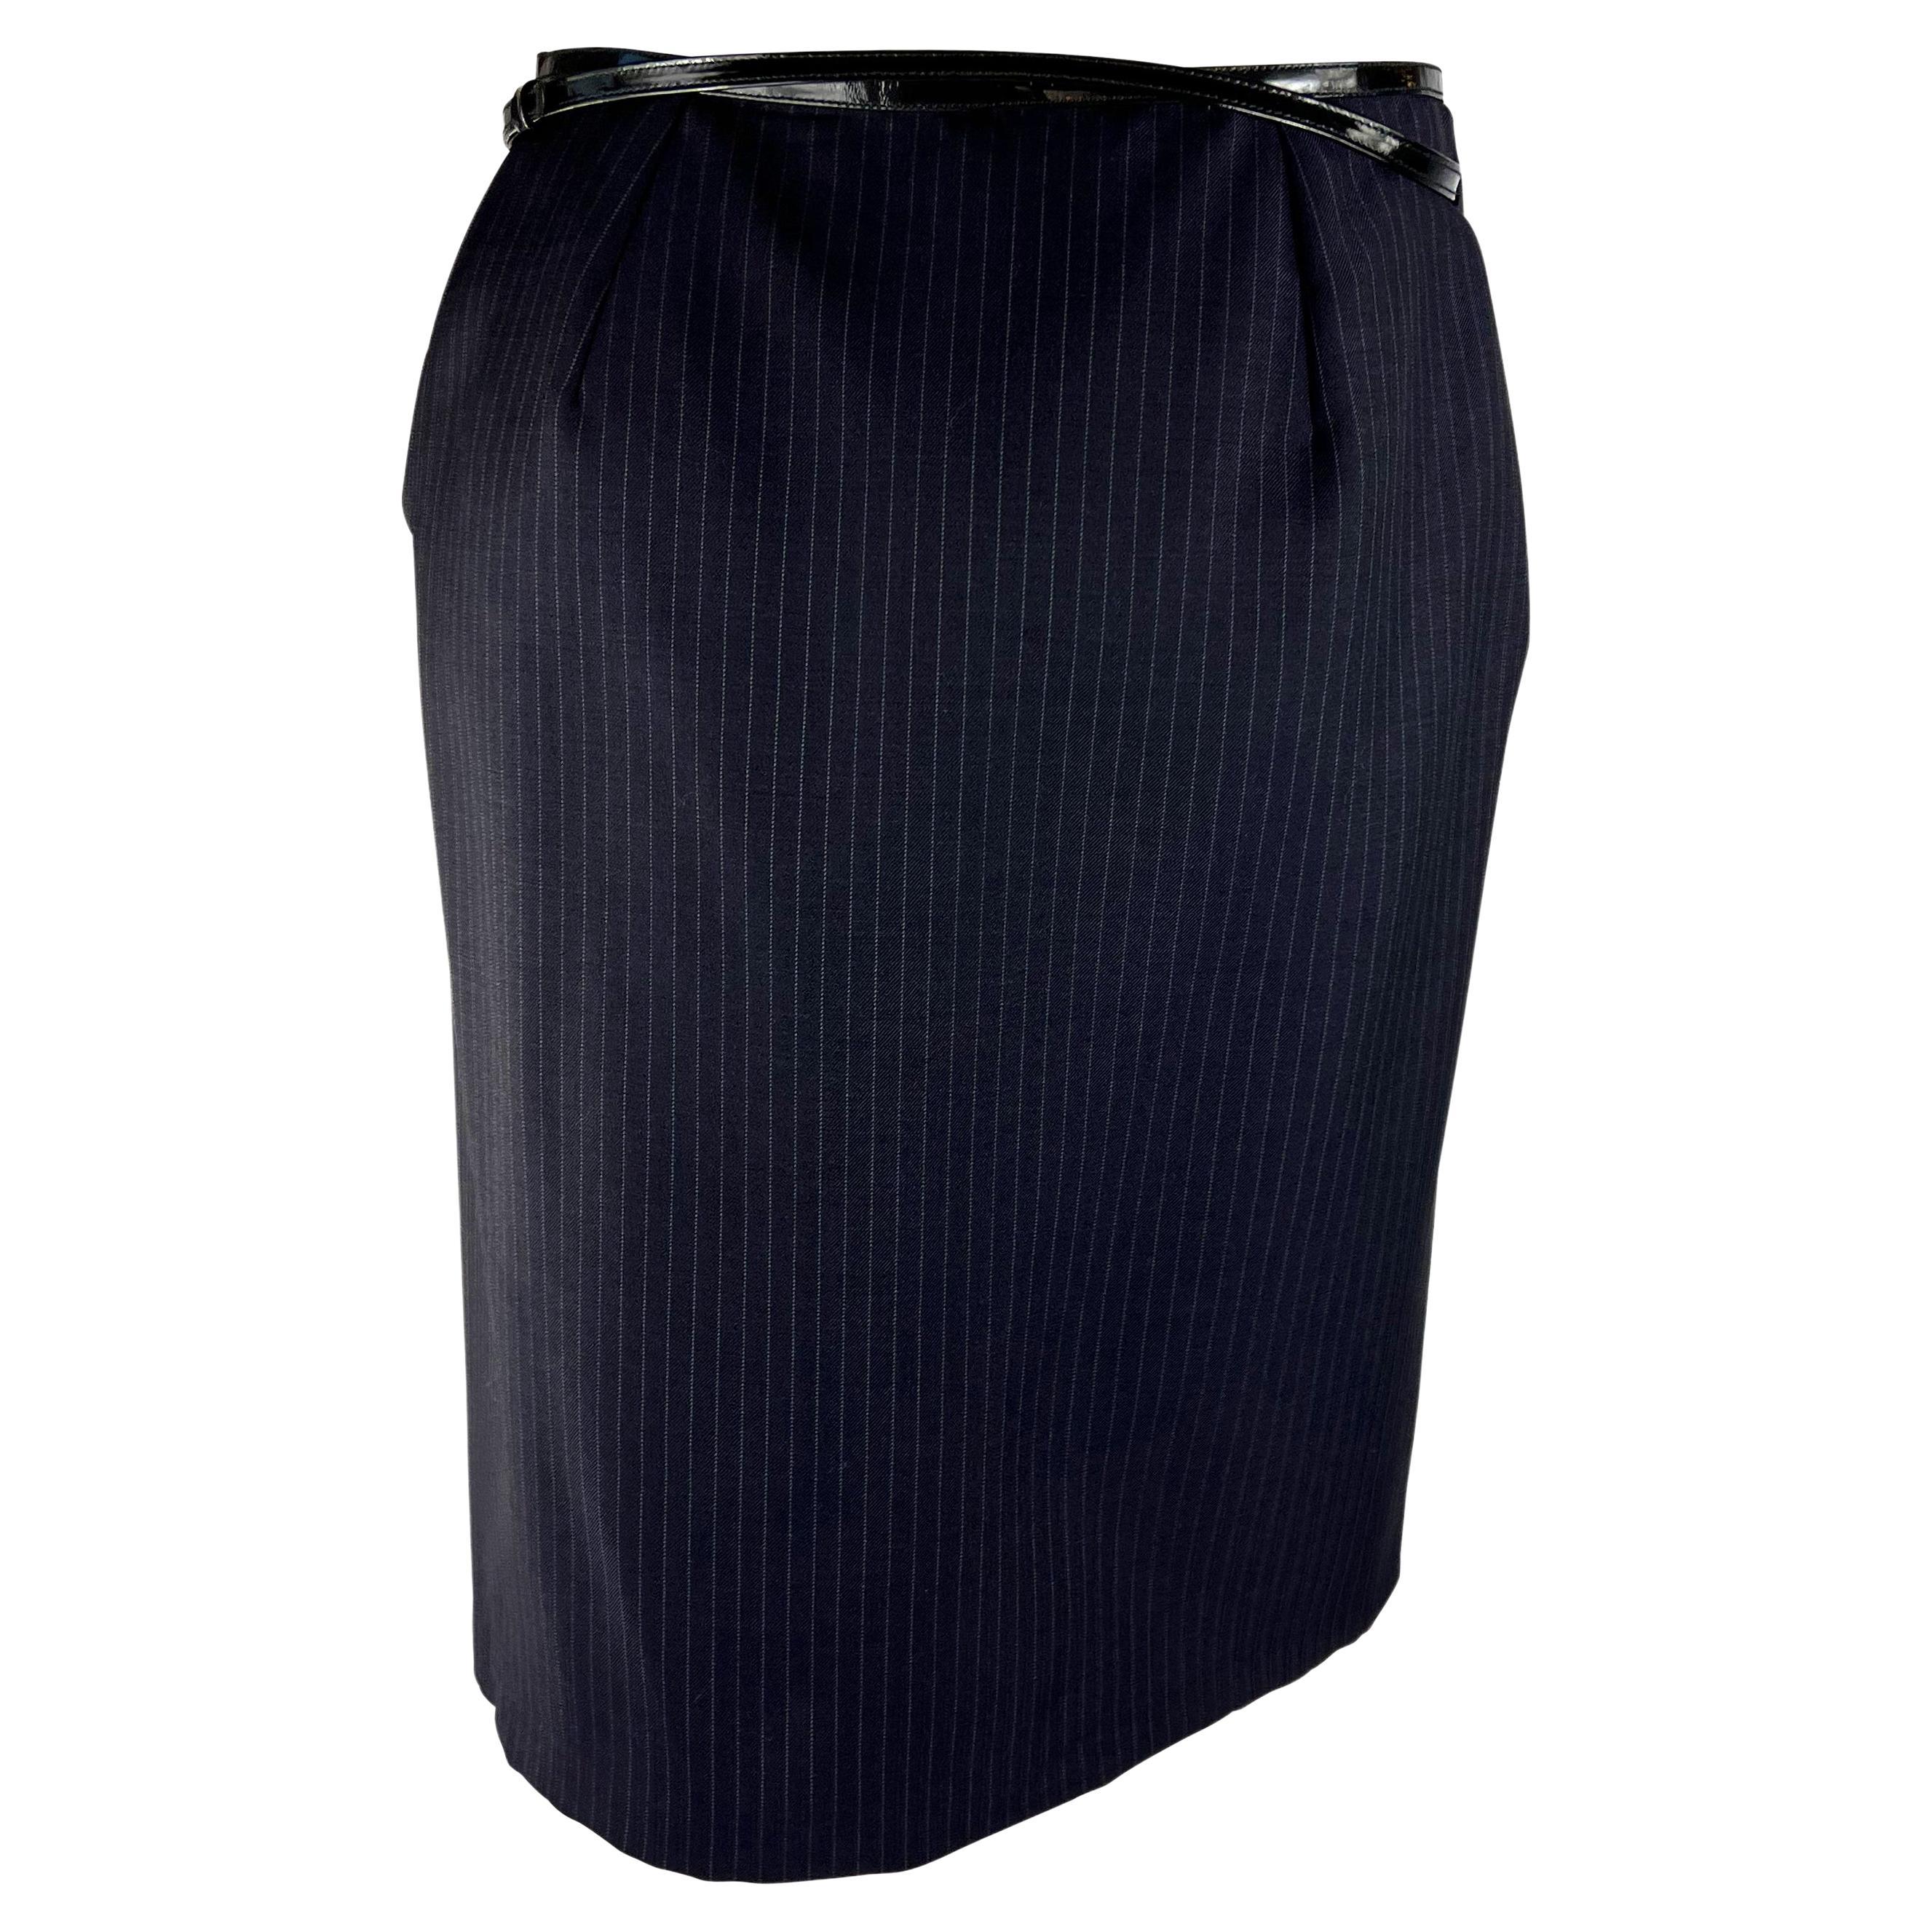 F/W 1997 Gucci by Tom Ford Runway Patent G Buckle Navy Pinstripe Wrap Skirt 8